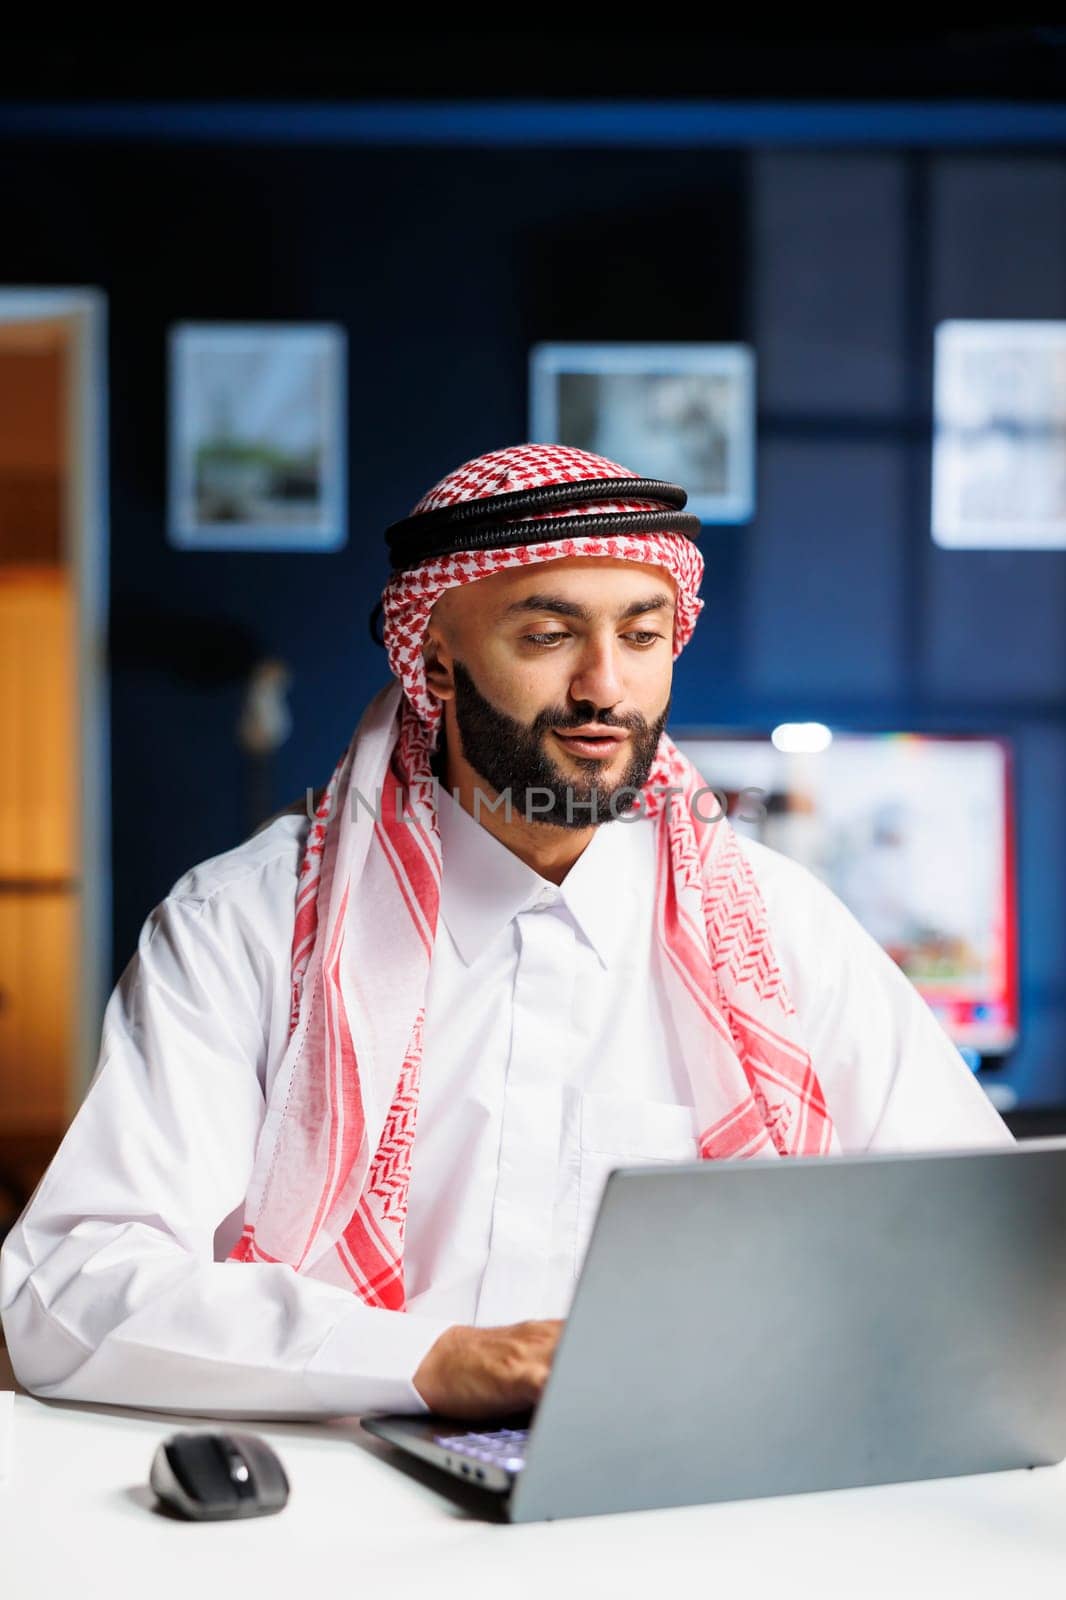 Showcasing professional dedication is Middle Eastern man in traditional clothing utilizing his personal computer for online research. Detailed view of Arab guy diligently working on digital laptop.